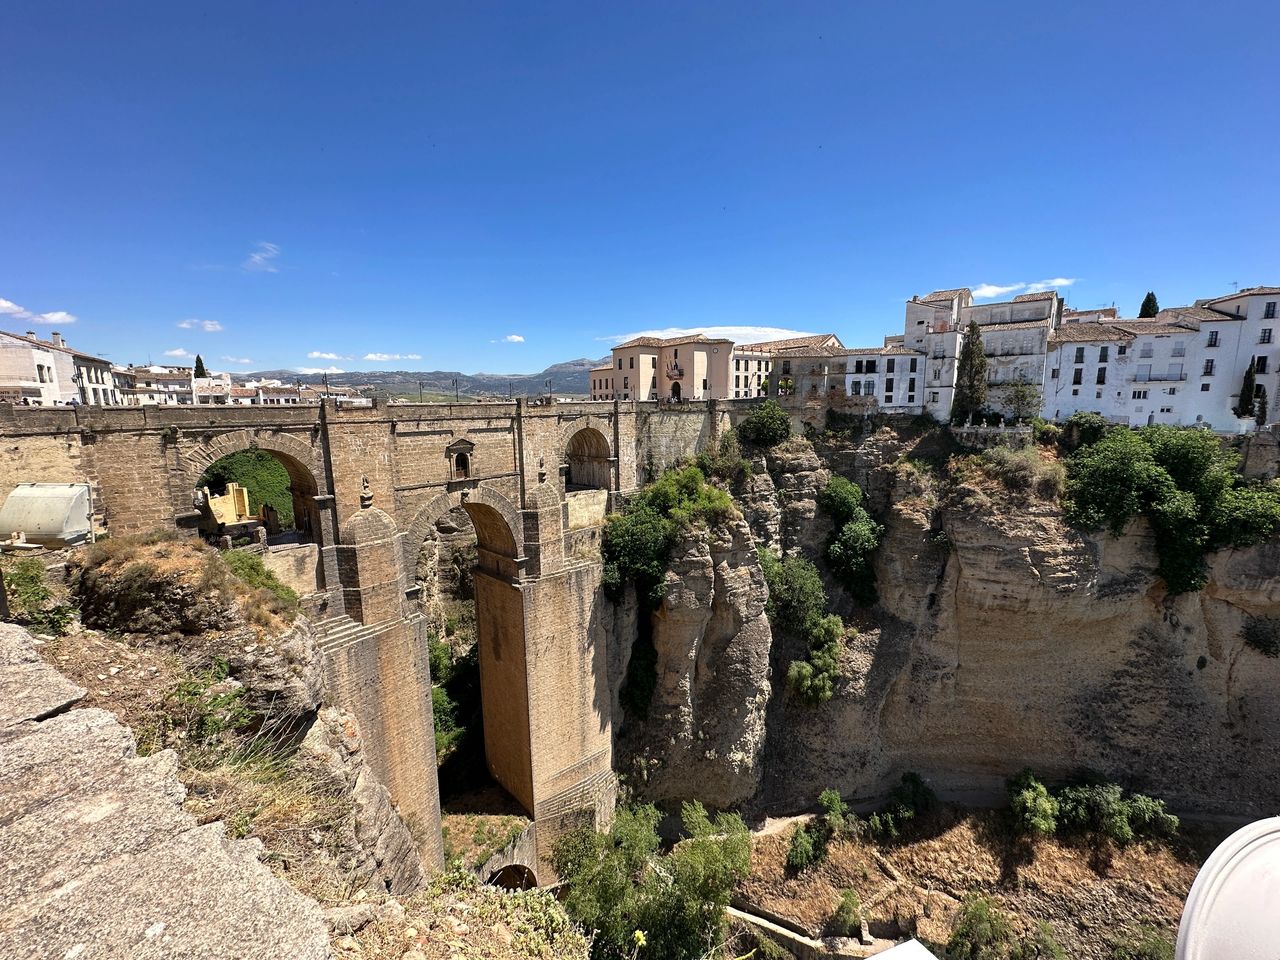 The Tajo de Ronda, separating the Old City from the New City